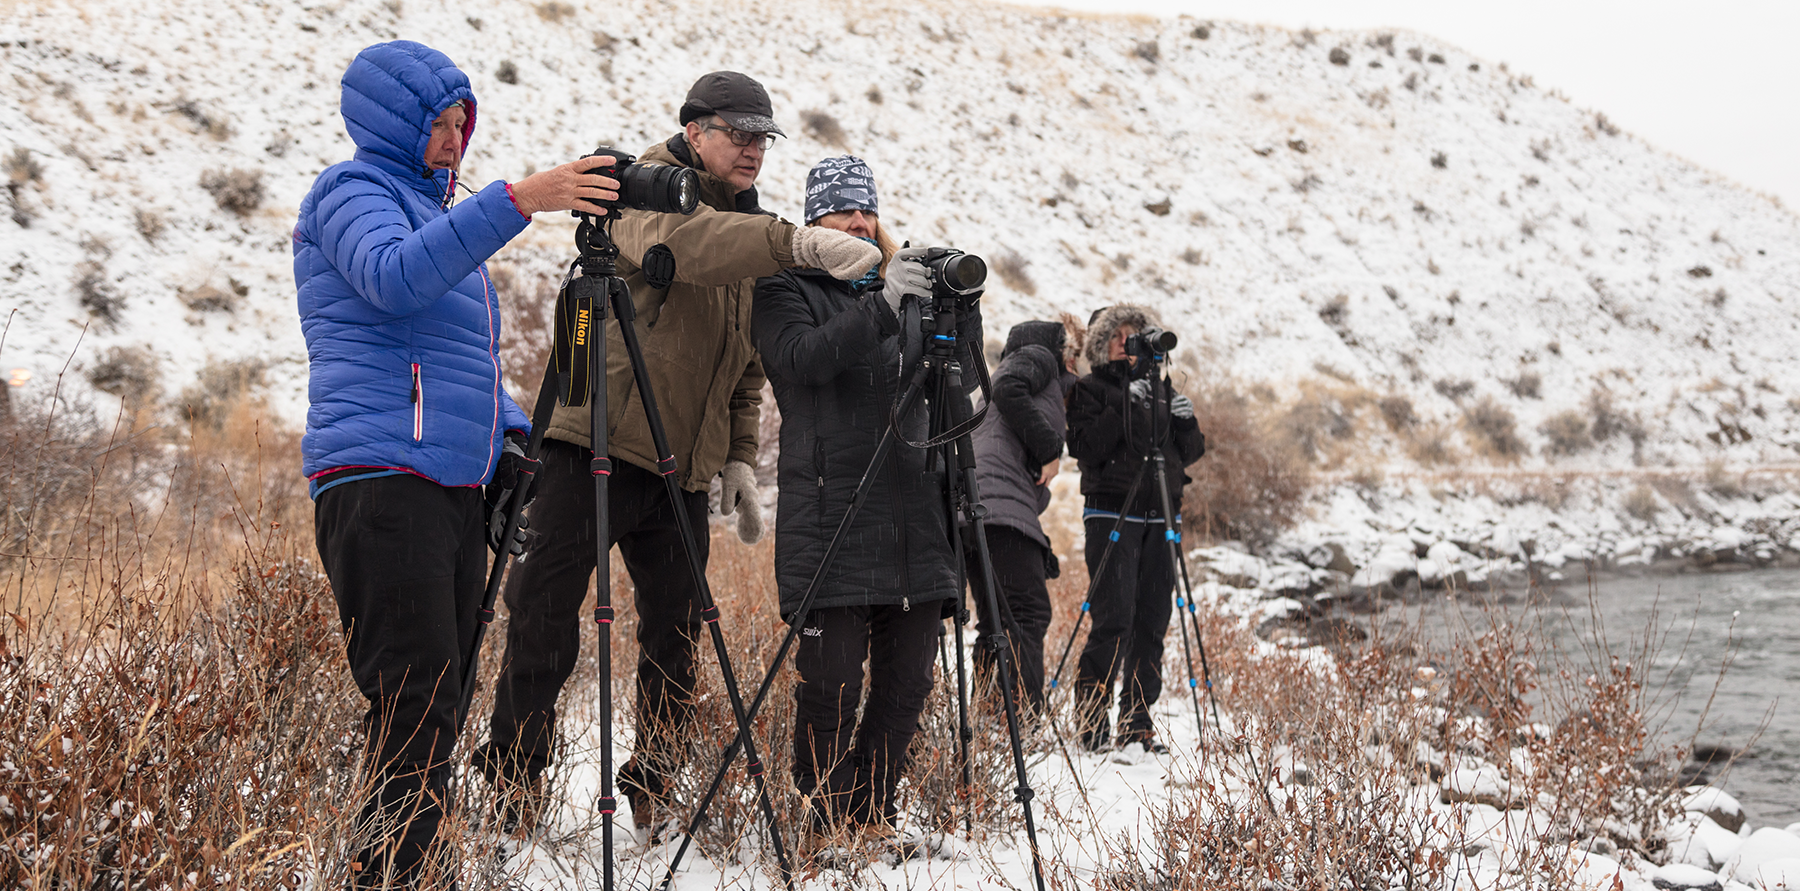 A group of adults looks through cameras on tripods while standing in the snow.